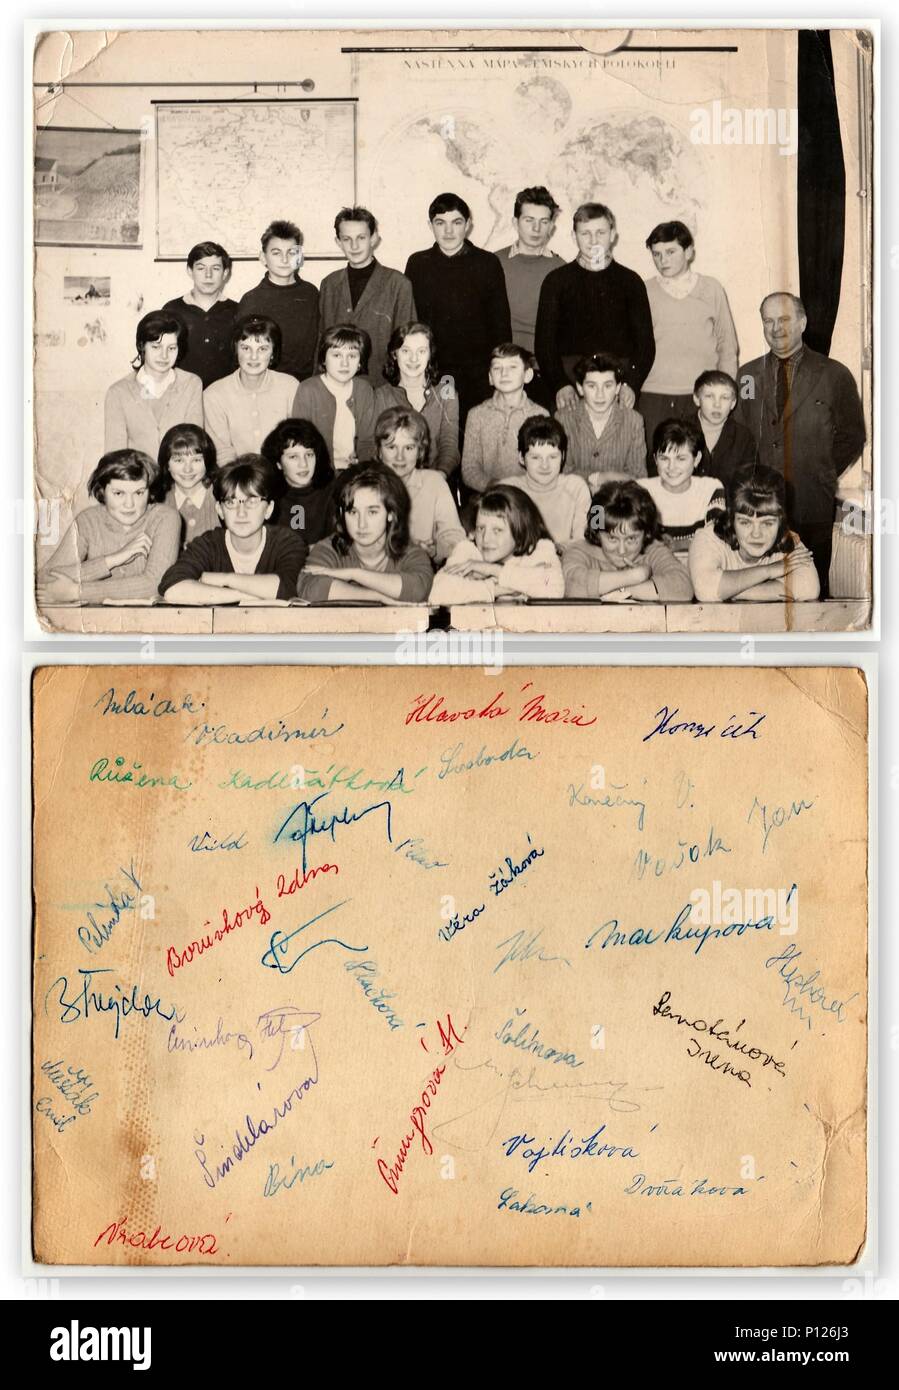 THE CZECHOSLOVAK SOCIALIST REPUBLIC - CIRCA 1960s: Retro photo shows students with male teacher in the classroom. The back of vintage photo shows signatures. Stock Photo